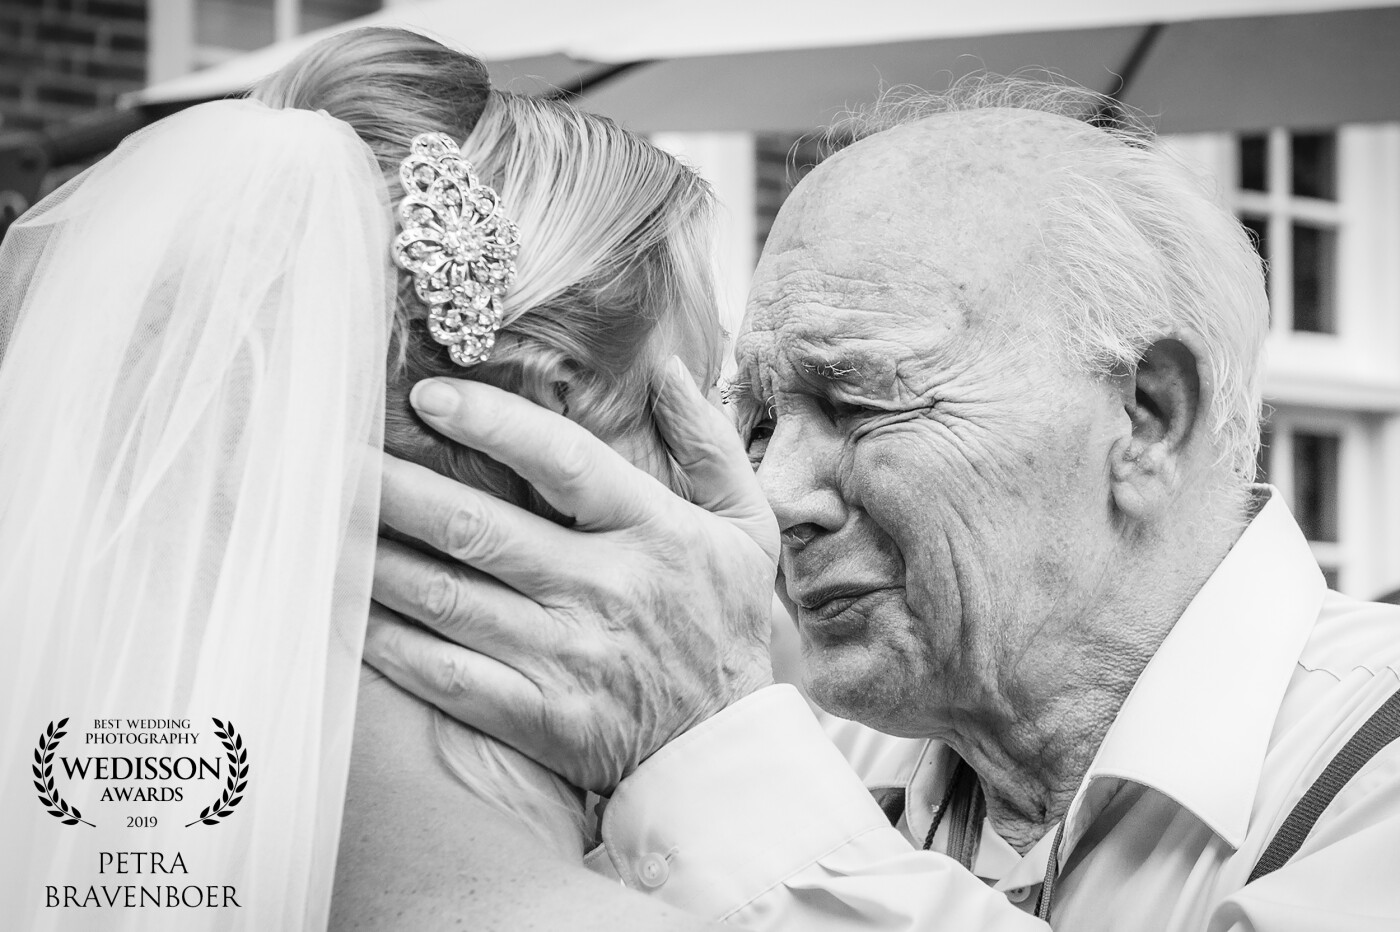 When your grandfather is so happy to be at your wedding... A special day for him to see his granddaughter get married. He is the first one to congratulate you with your marriage ♥ 